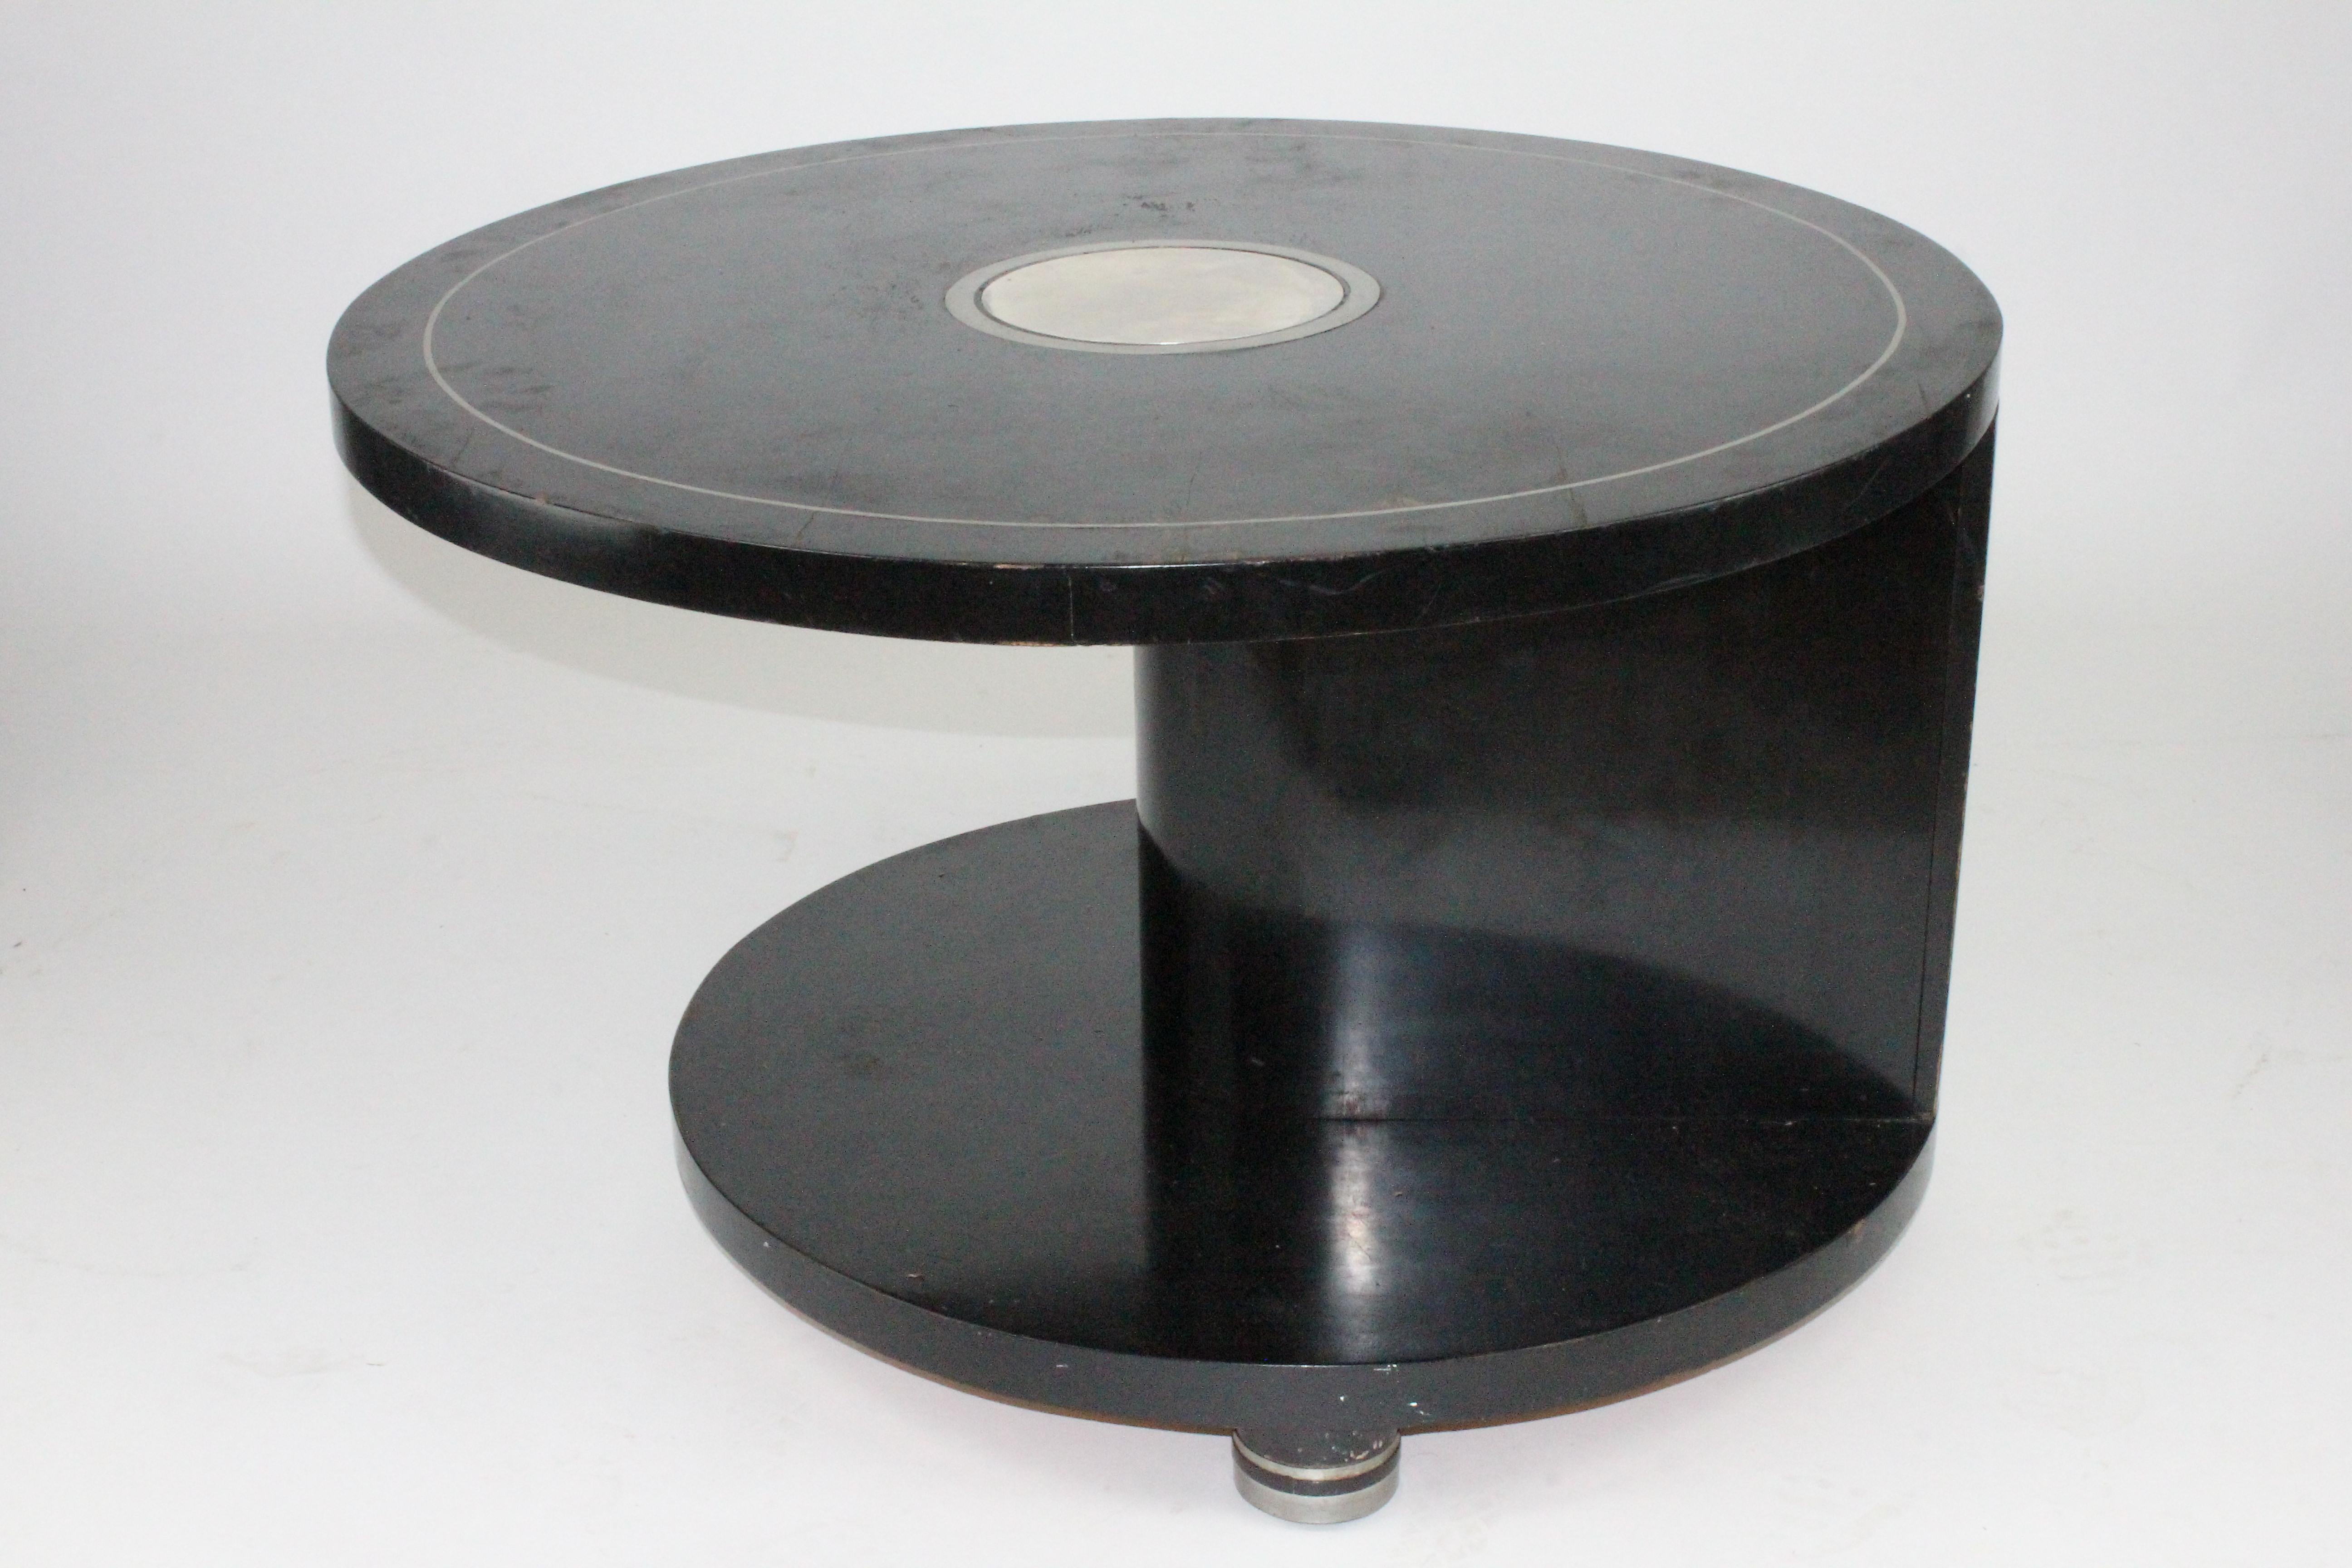 Alvar Andersson Table, 1933, Swedish, Black Painted with Pewter Inlays 3